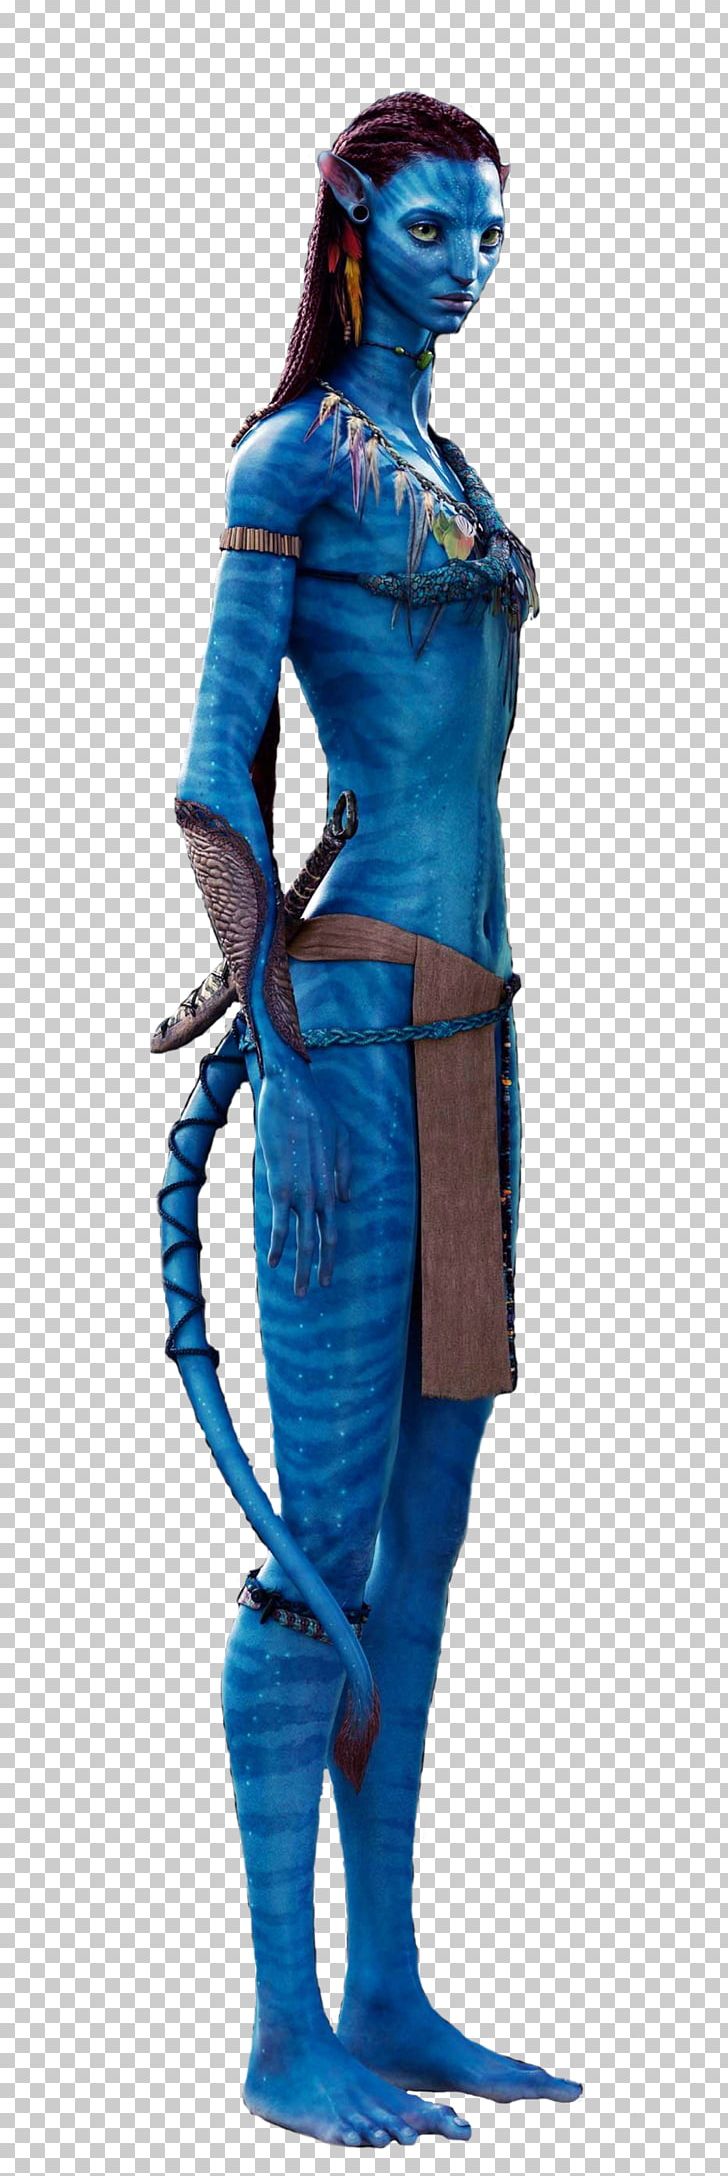 Neytiri Avatar James Cameron Jake Sully Mo'at PNG, Clipart, Art, Avatar, Avatar 2, Cosplay, Costume Free PNG Download